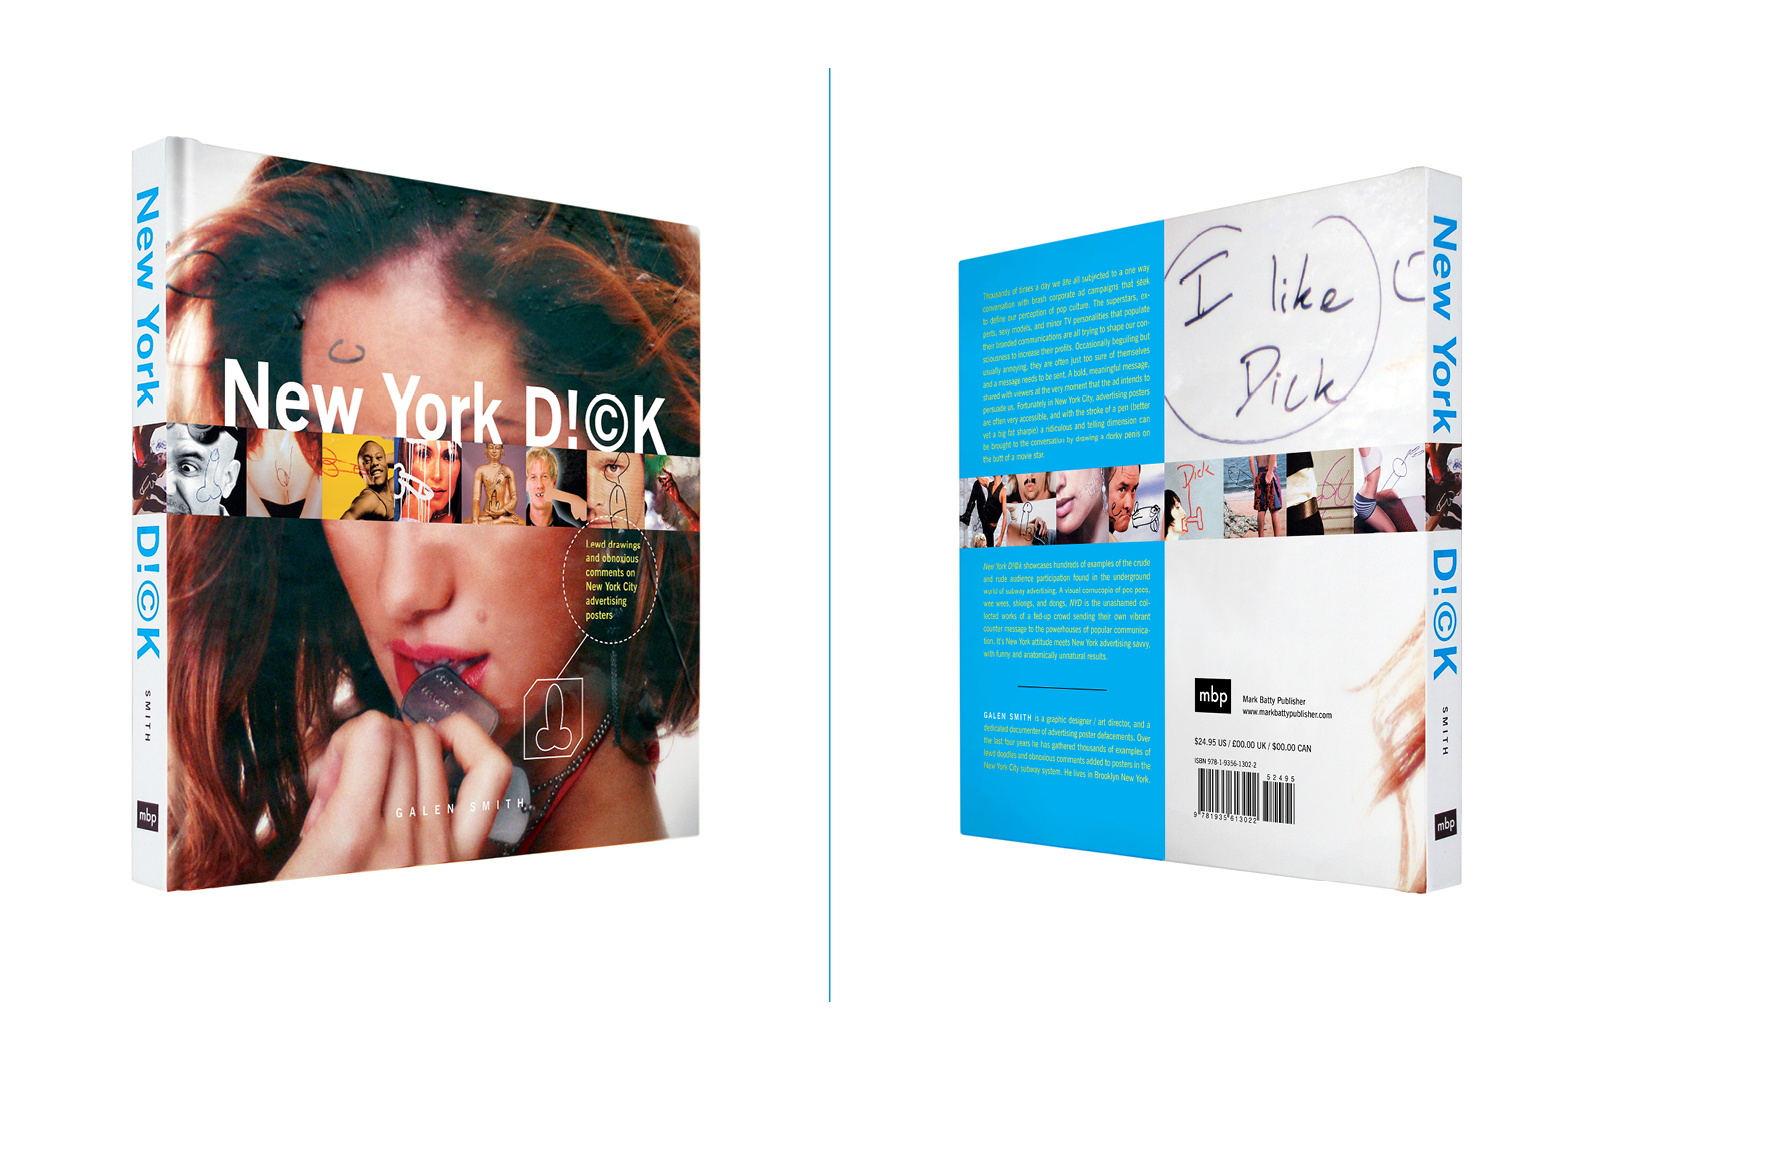   New York Dick -  7.5 X 7.5 in., 128 pg., hardcover with spot uv. Design and photography; Galen Smith // Publisher; Mark Batty Publisher     